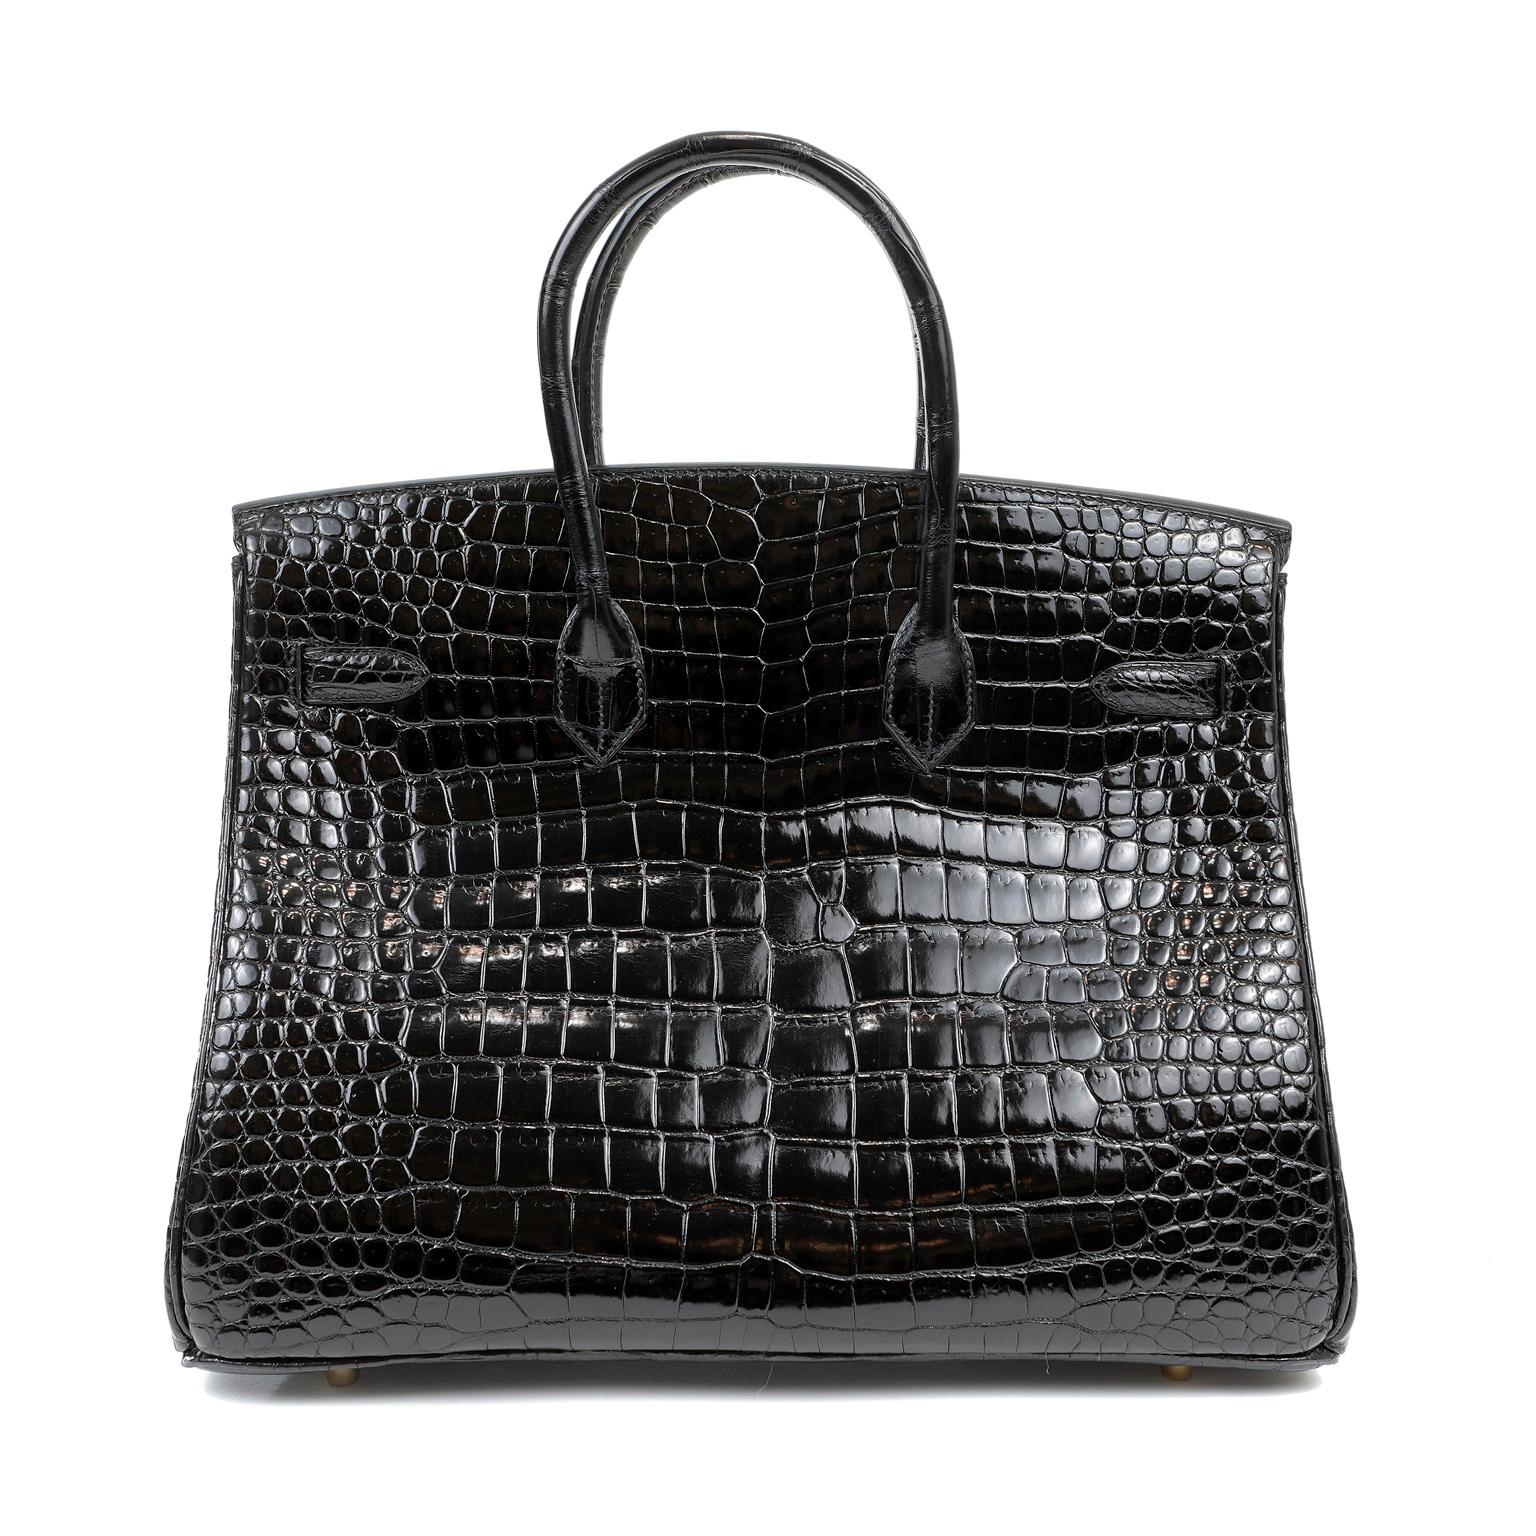 This authentic Hermès Black Crocodile 35 cm Birkin is in mint condition with protective plastic intact on the hardware.   Hermès bags are considered the ultimate luxury item the world over.  Hand stitched by skilled craftsmen, wait lists of a year